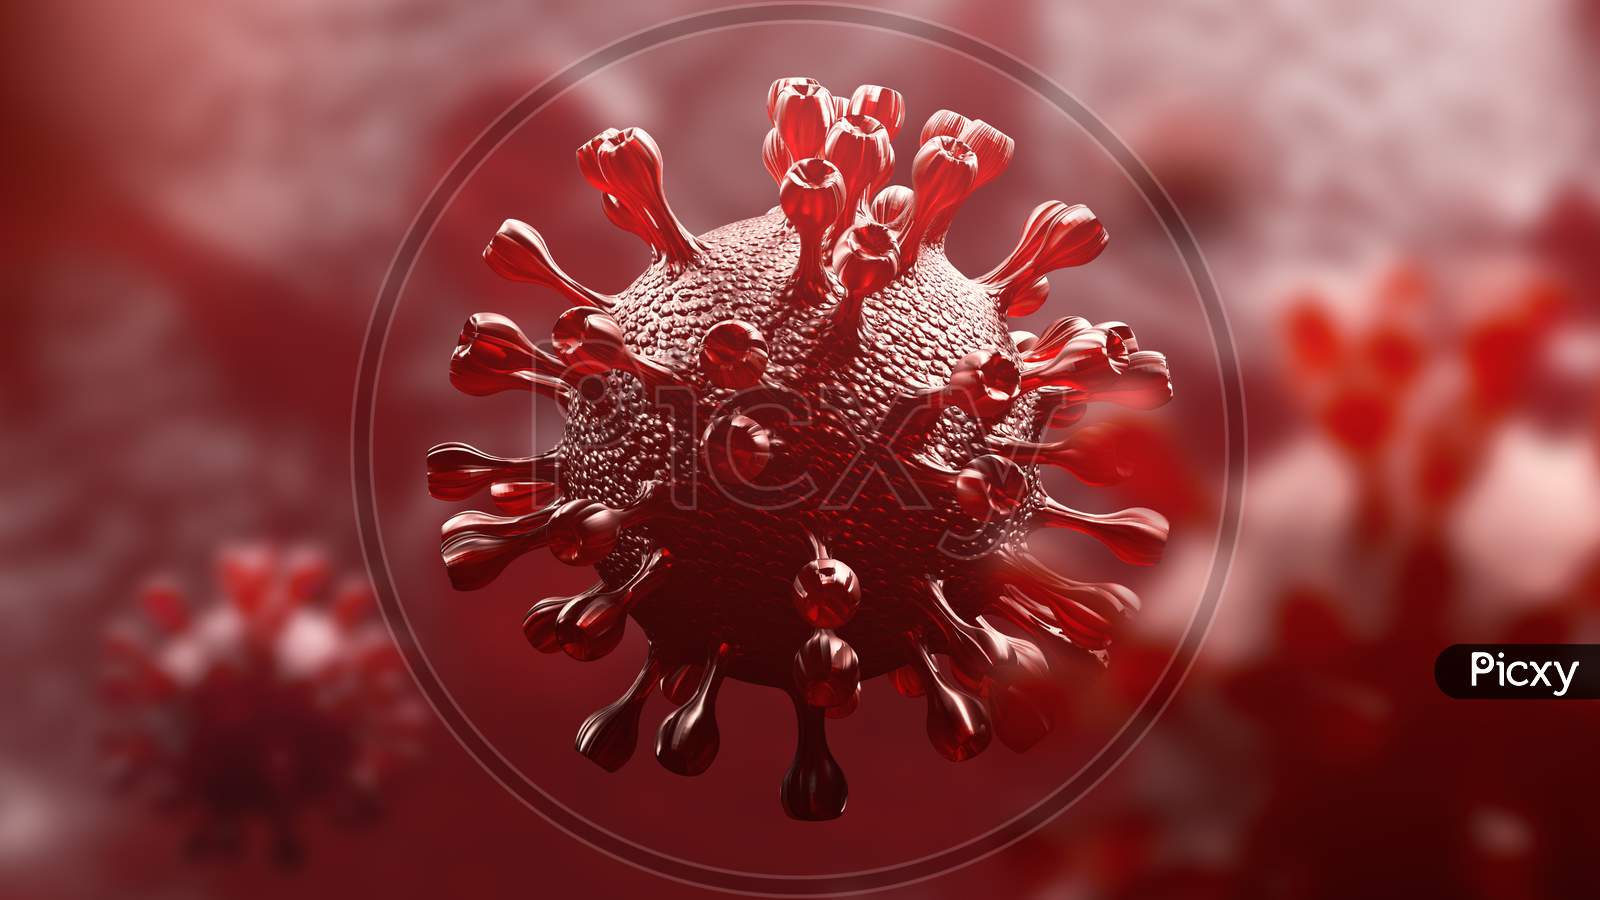 Super Closeup Coronavirus Covid-19 In Human Lung Body Background. Science Microbiology Concept. Red Corona Virus Outbreak Epidemic. Medical Health Virology Infection Research. 3D Illustration